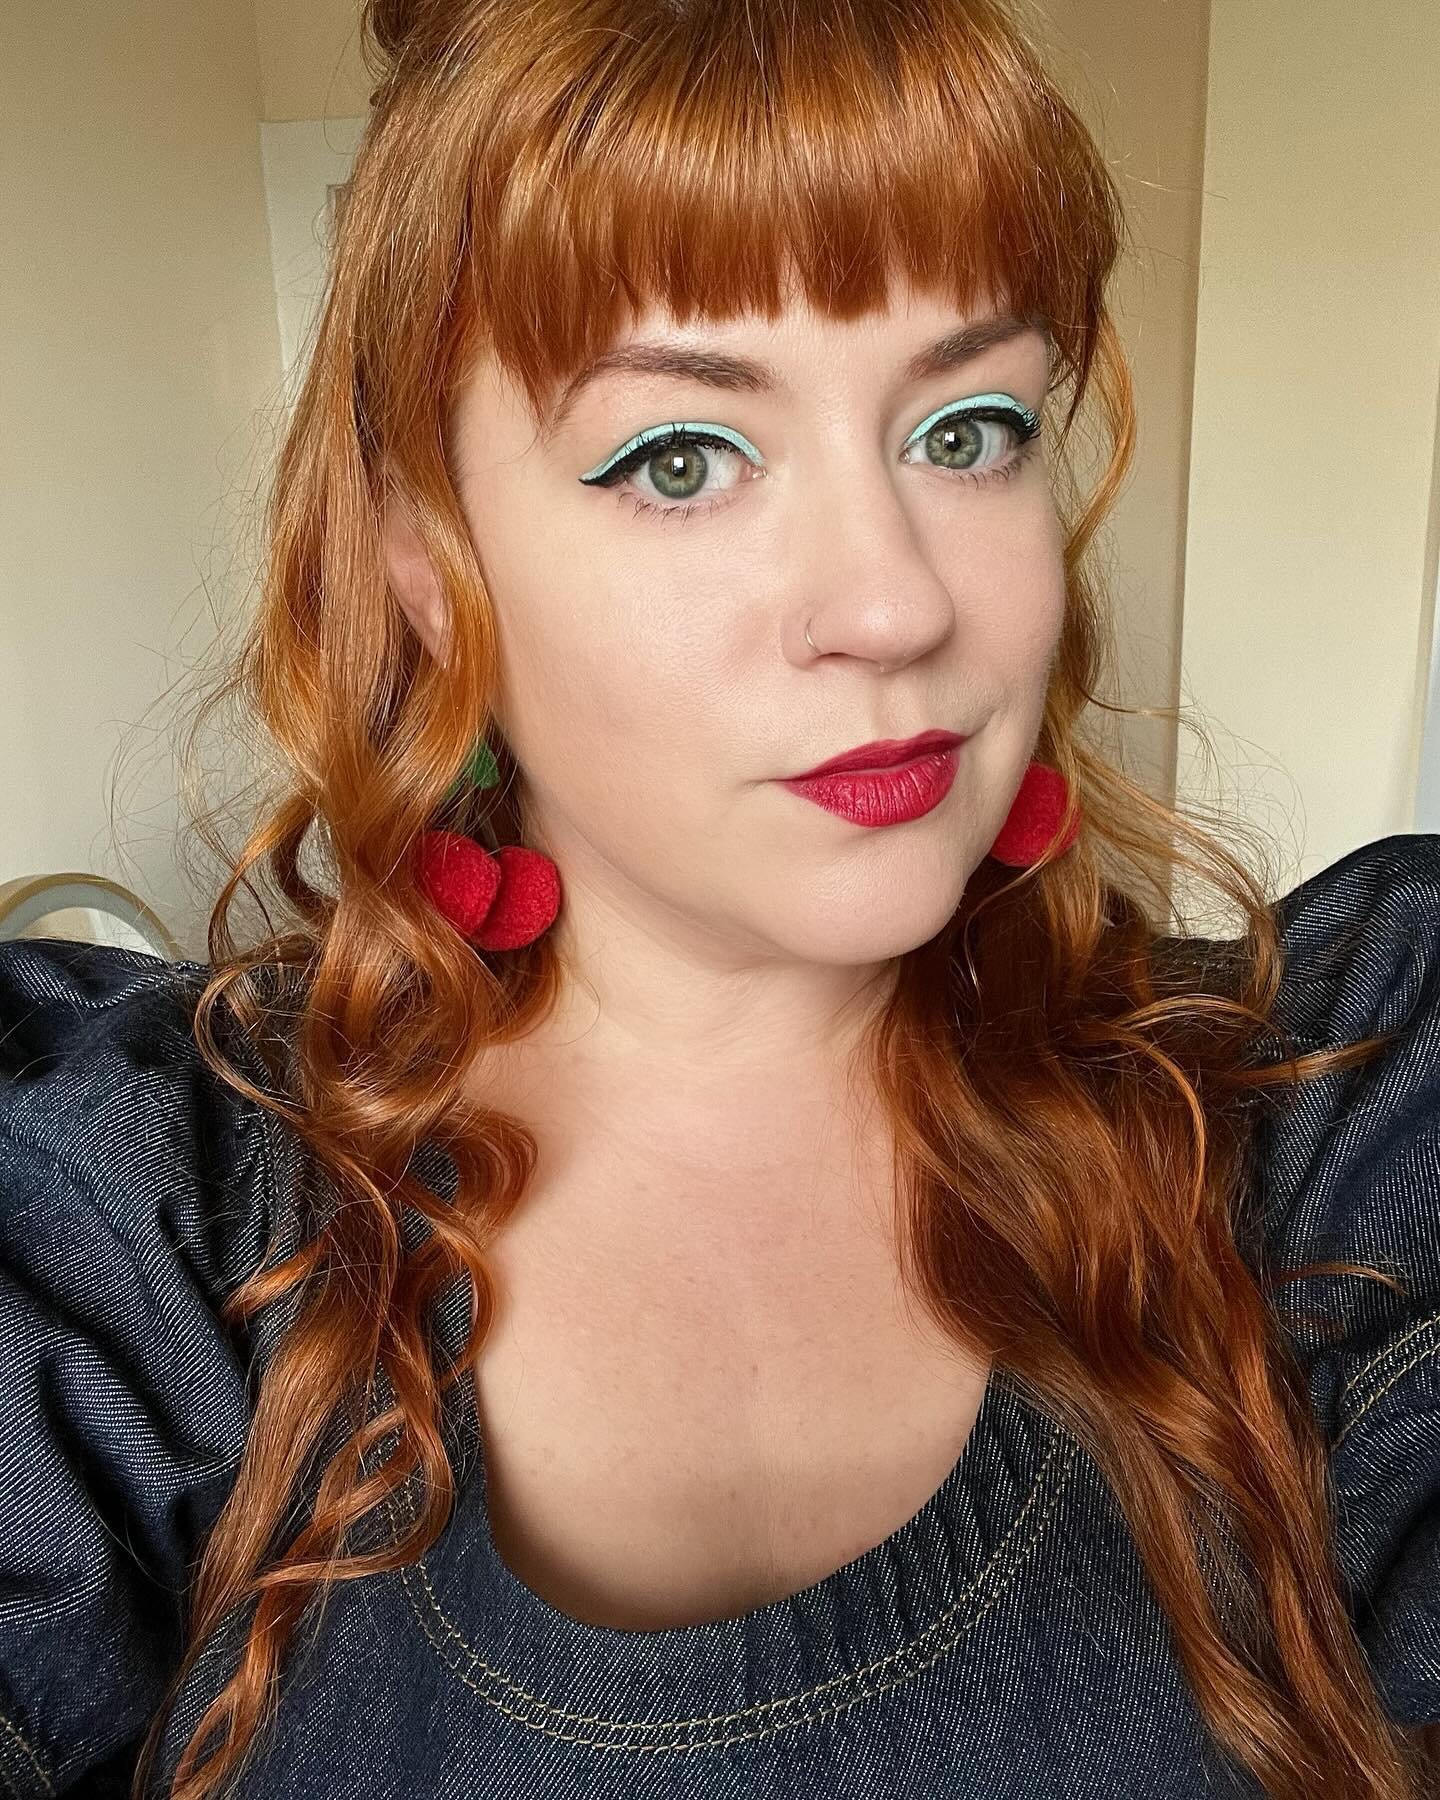 unseasonably warm weather yesterday called for some unhinged summer makeup and a new dress and a pizza covered in ramps